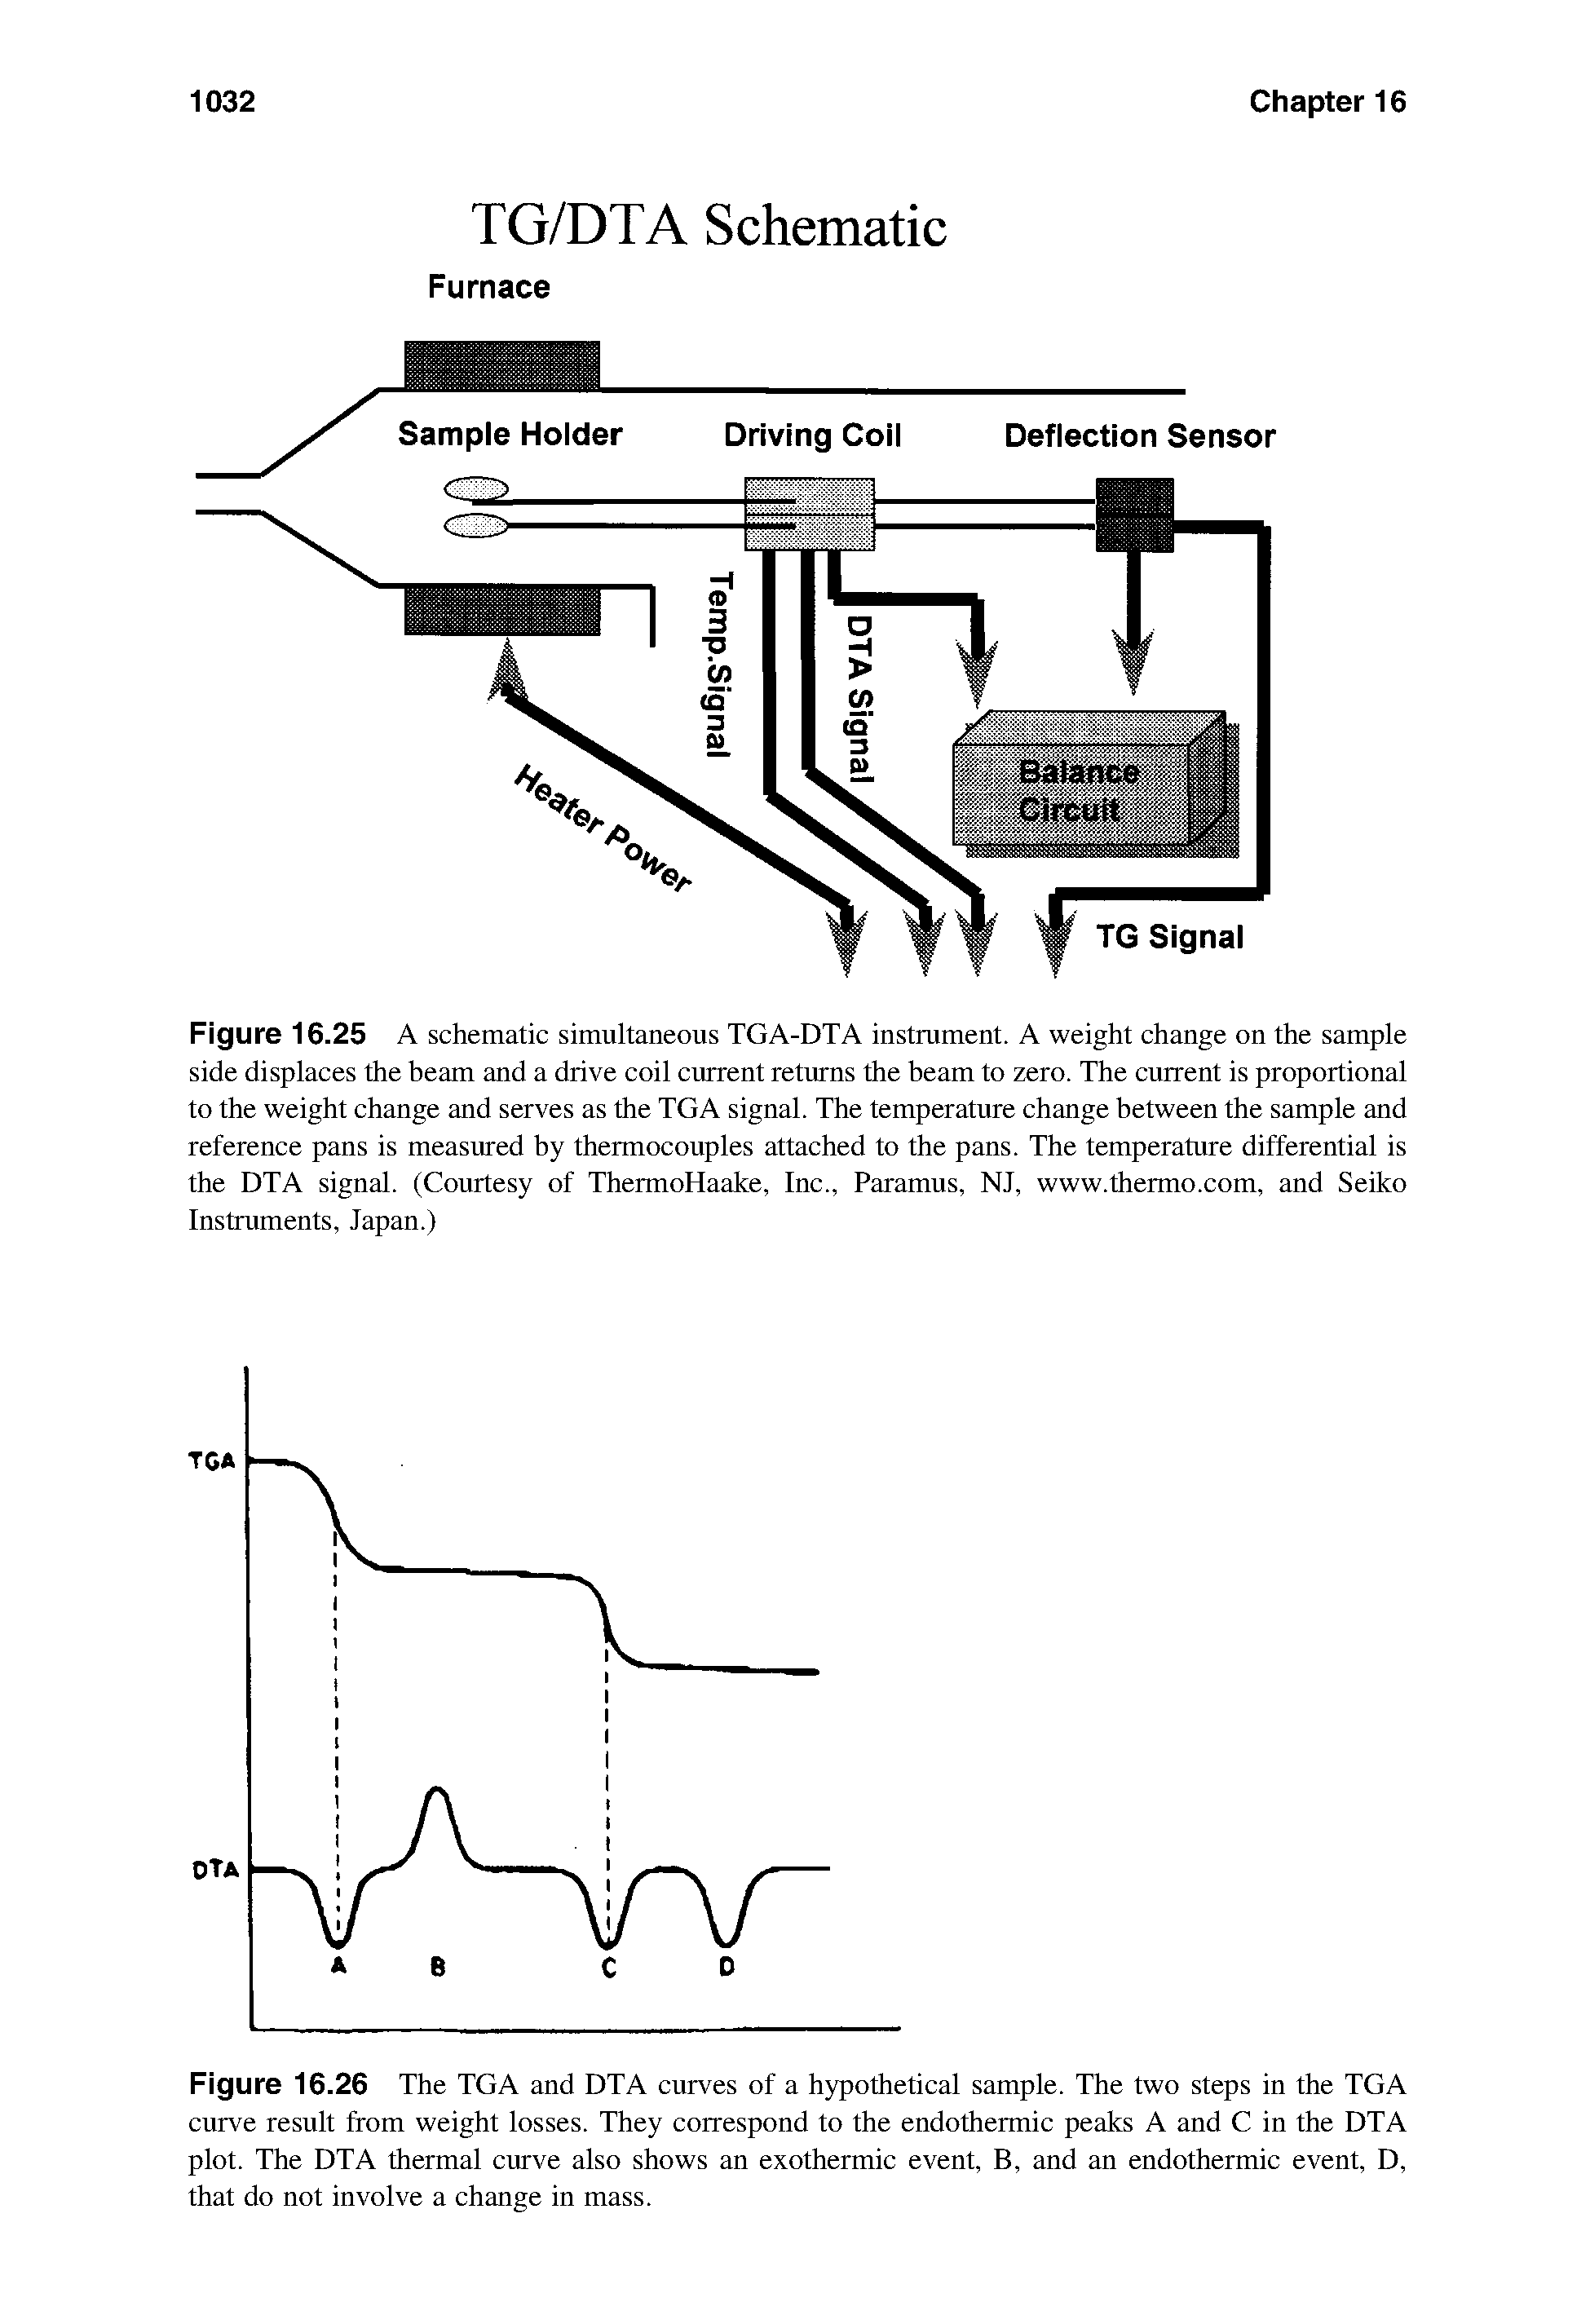 Figure 16.25 A schematic simultaneous TGA-DTA instrument. A weight change on the sample side displaces the beam and a drive coil current returns the beam to zero. The current is proportional to the weight change and serves as the TGA signal. The temperature change between the sample and reference pans is measured by thermocouples attached to the pans. The temperature differential is the DTA signal. (Courtesy of ThermoHaake, Inc., Paramus, NJ, www.thermo.com, and Seiko Instruments, Japan.)...